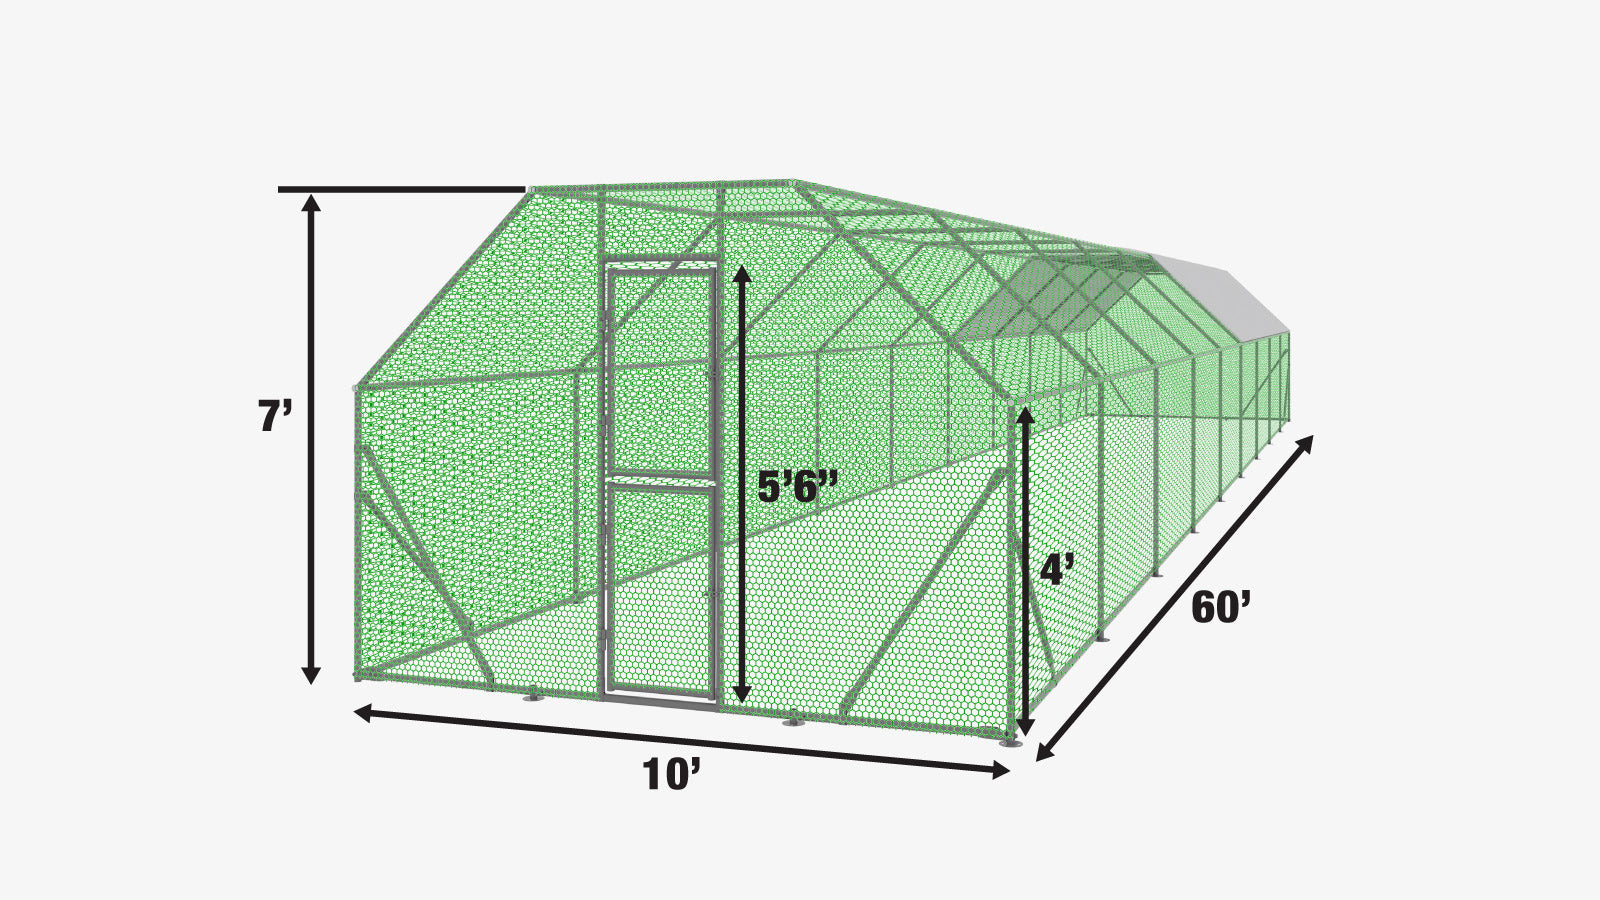 TMG Industrial 10' x 60' Wire Mesh Chicken Run Shelter Coop, Acier Galvanisé, 600 Sq-Ft, Verrouillable Gate, PVC Coated Mesh, TMG-CRS1060-specifications-image